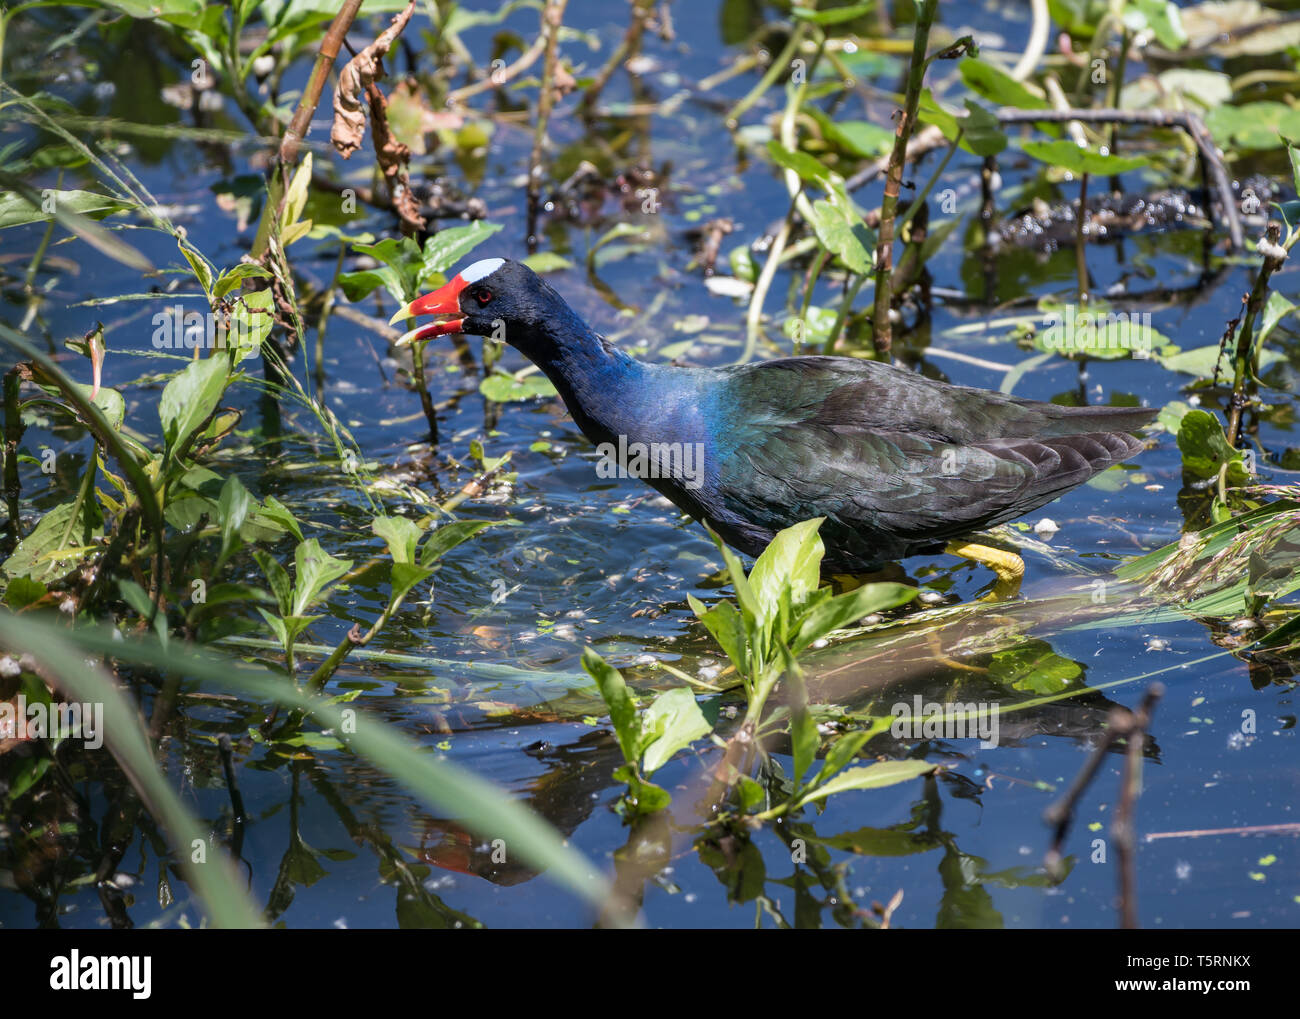 A colorful Purple Gallinule (Porphyrio martinicus) foraging in a pond. Houston, Texas, USA. Stock Photo